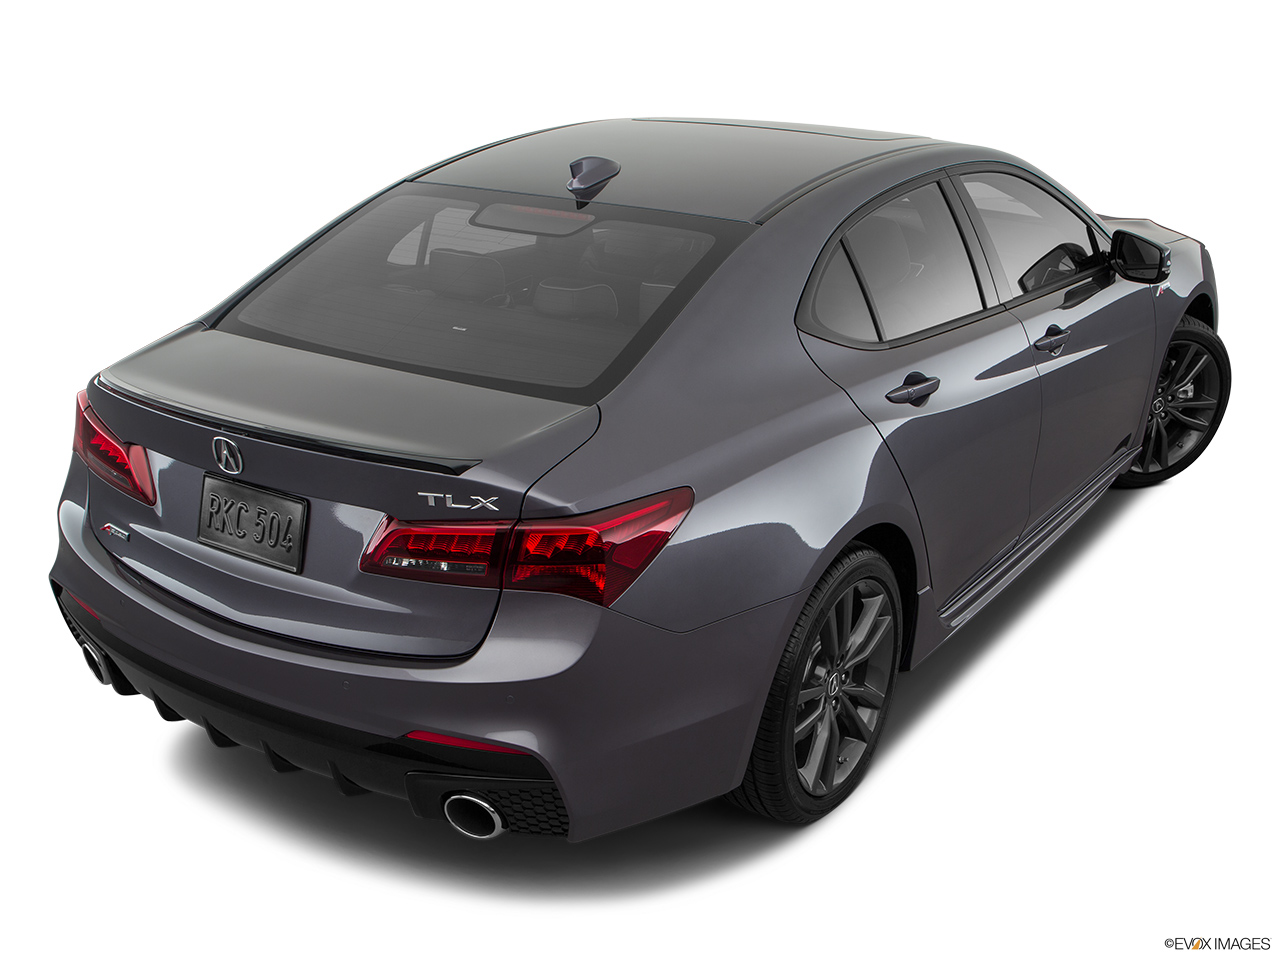 2020 Acura TLX 3.5L Rear 3/4 angle view. 